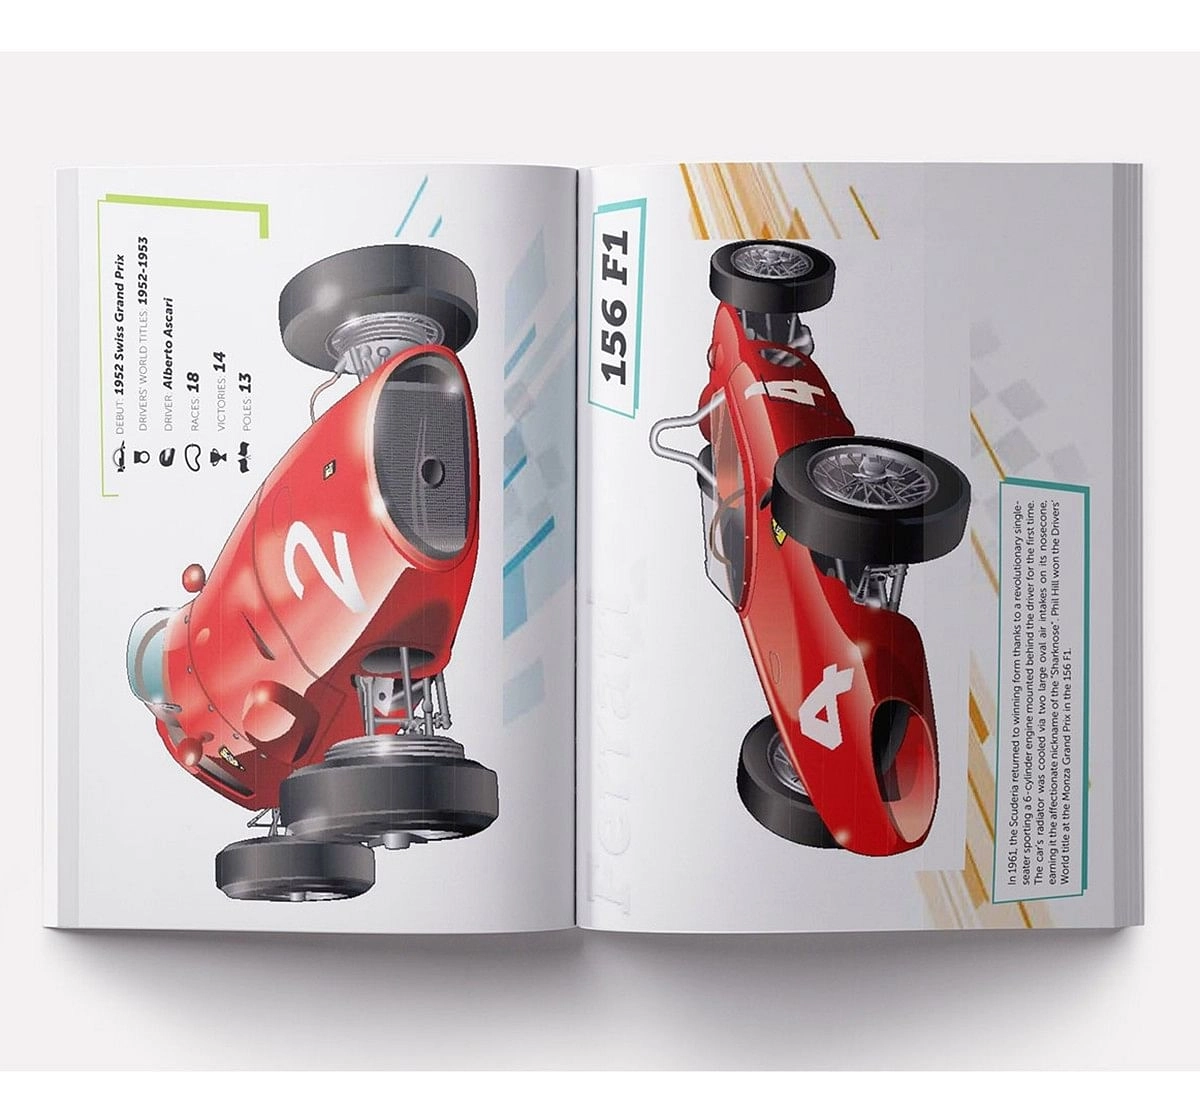 Ferrari Sticker Book For Kids: The Most Powerful Street Cars, 44 Pages Book By Franco Cosimo Panini, Paperback